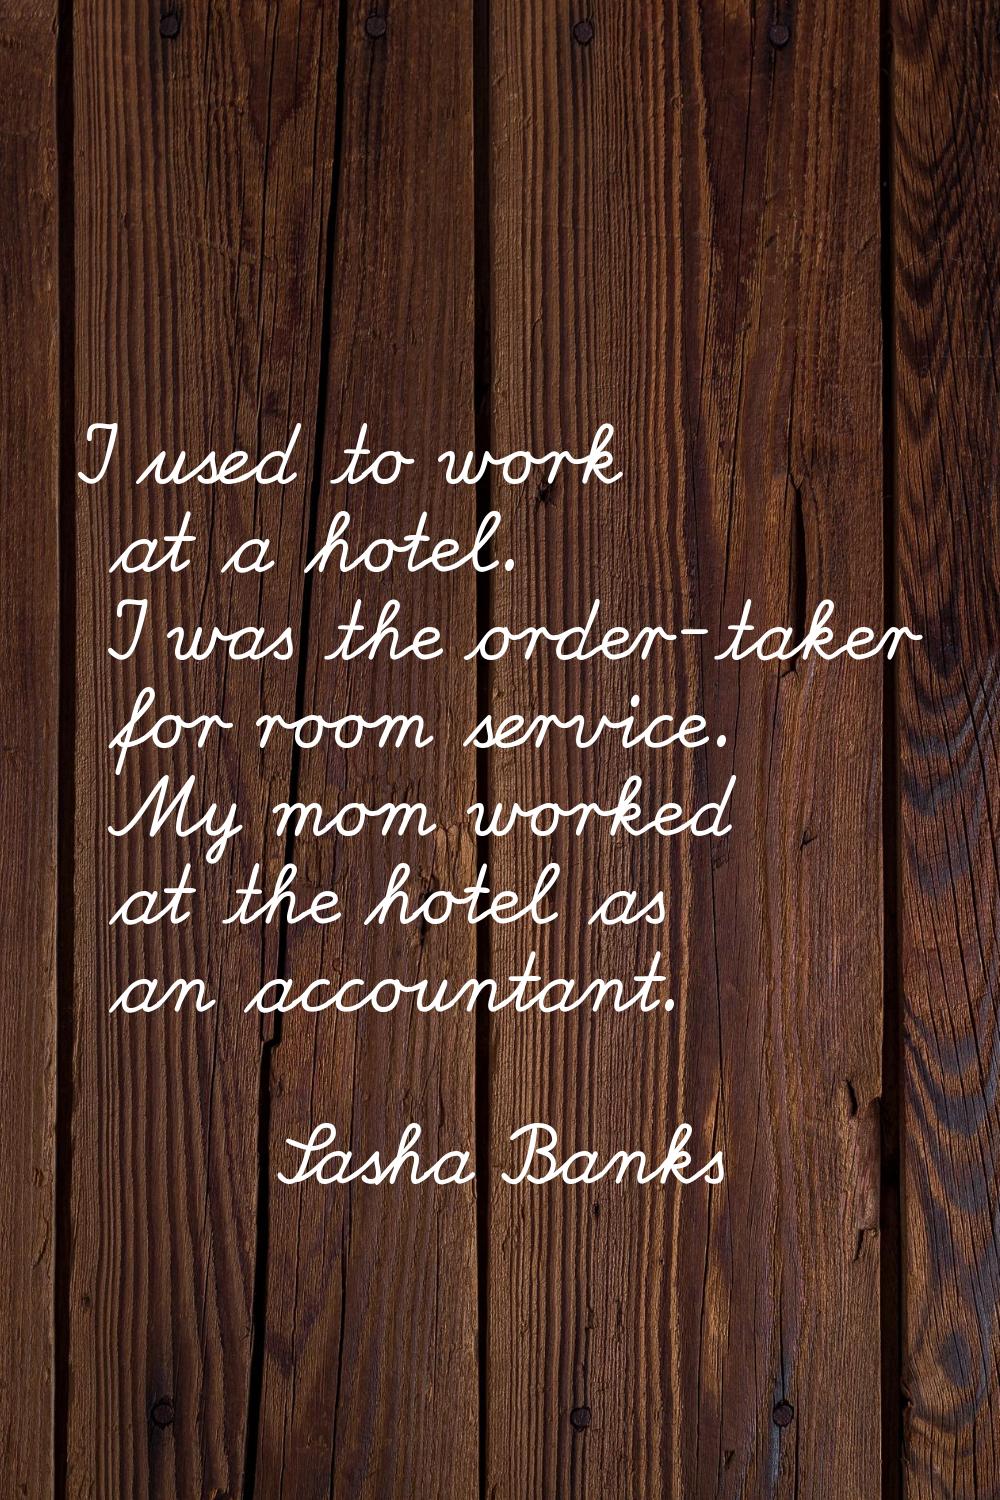 I used to work at a hotel. I was the order-taker for room service. My mom worked at the hotel as an